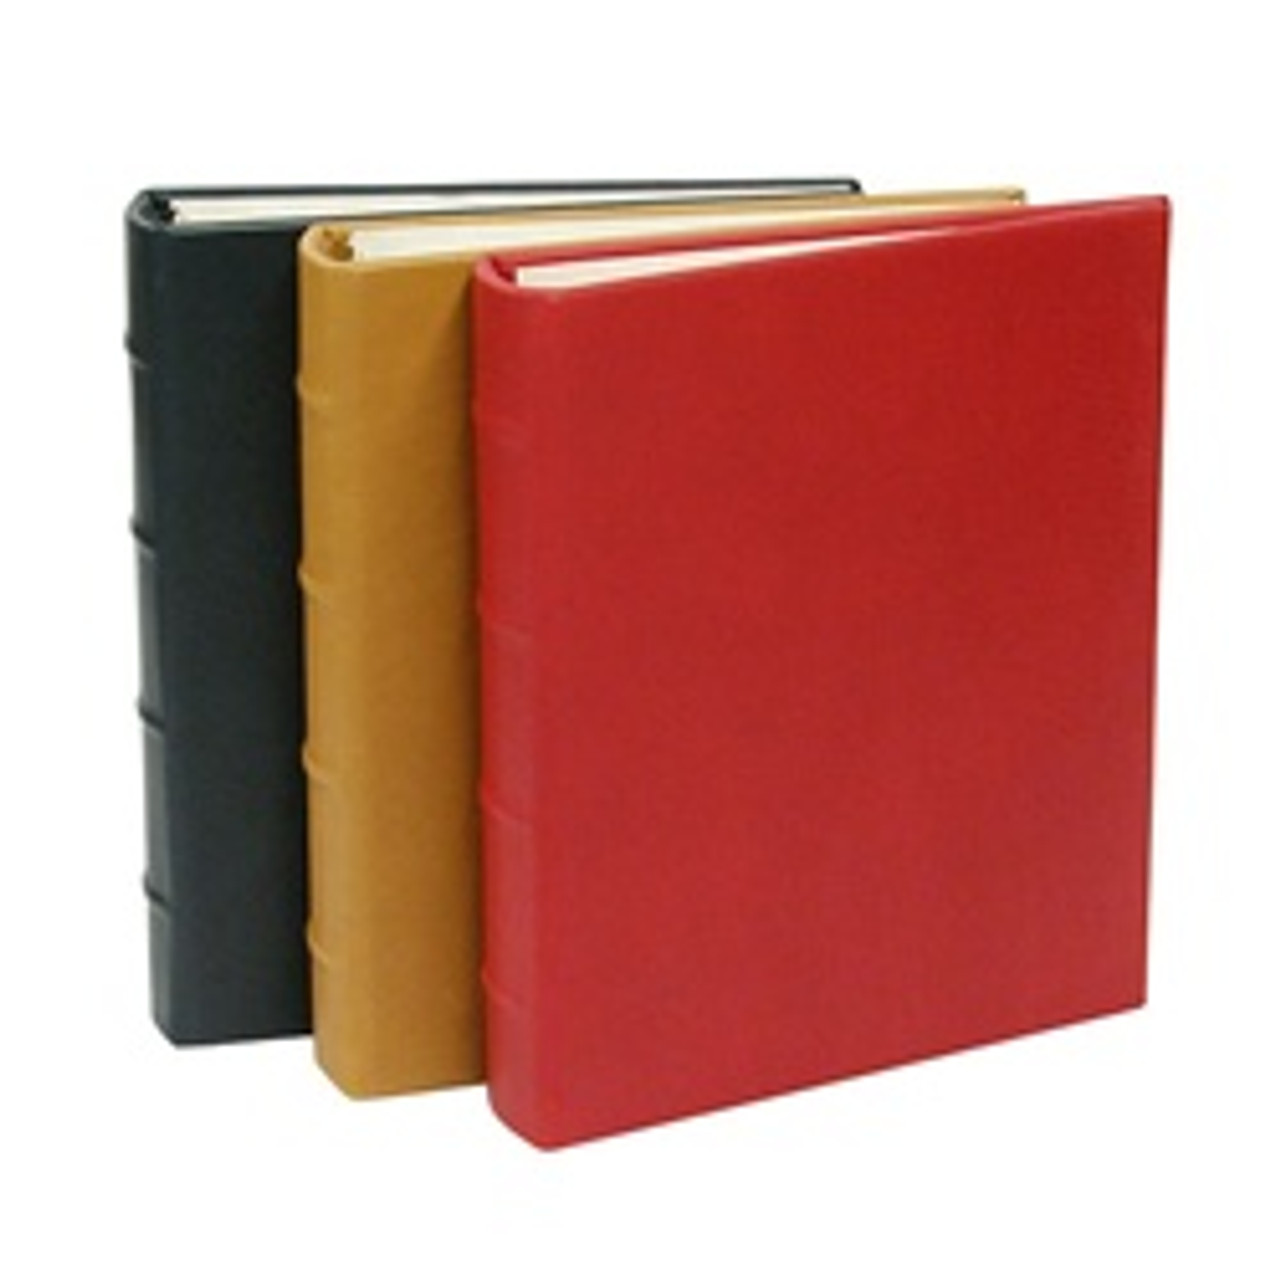 Gallery Leather Compact Window Photo Album Camden Red